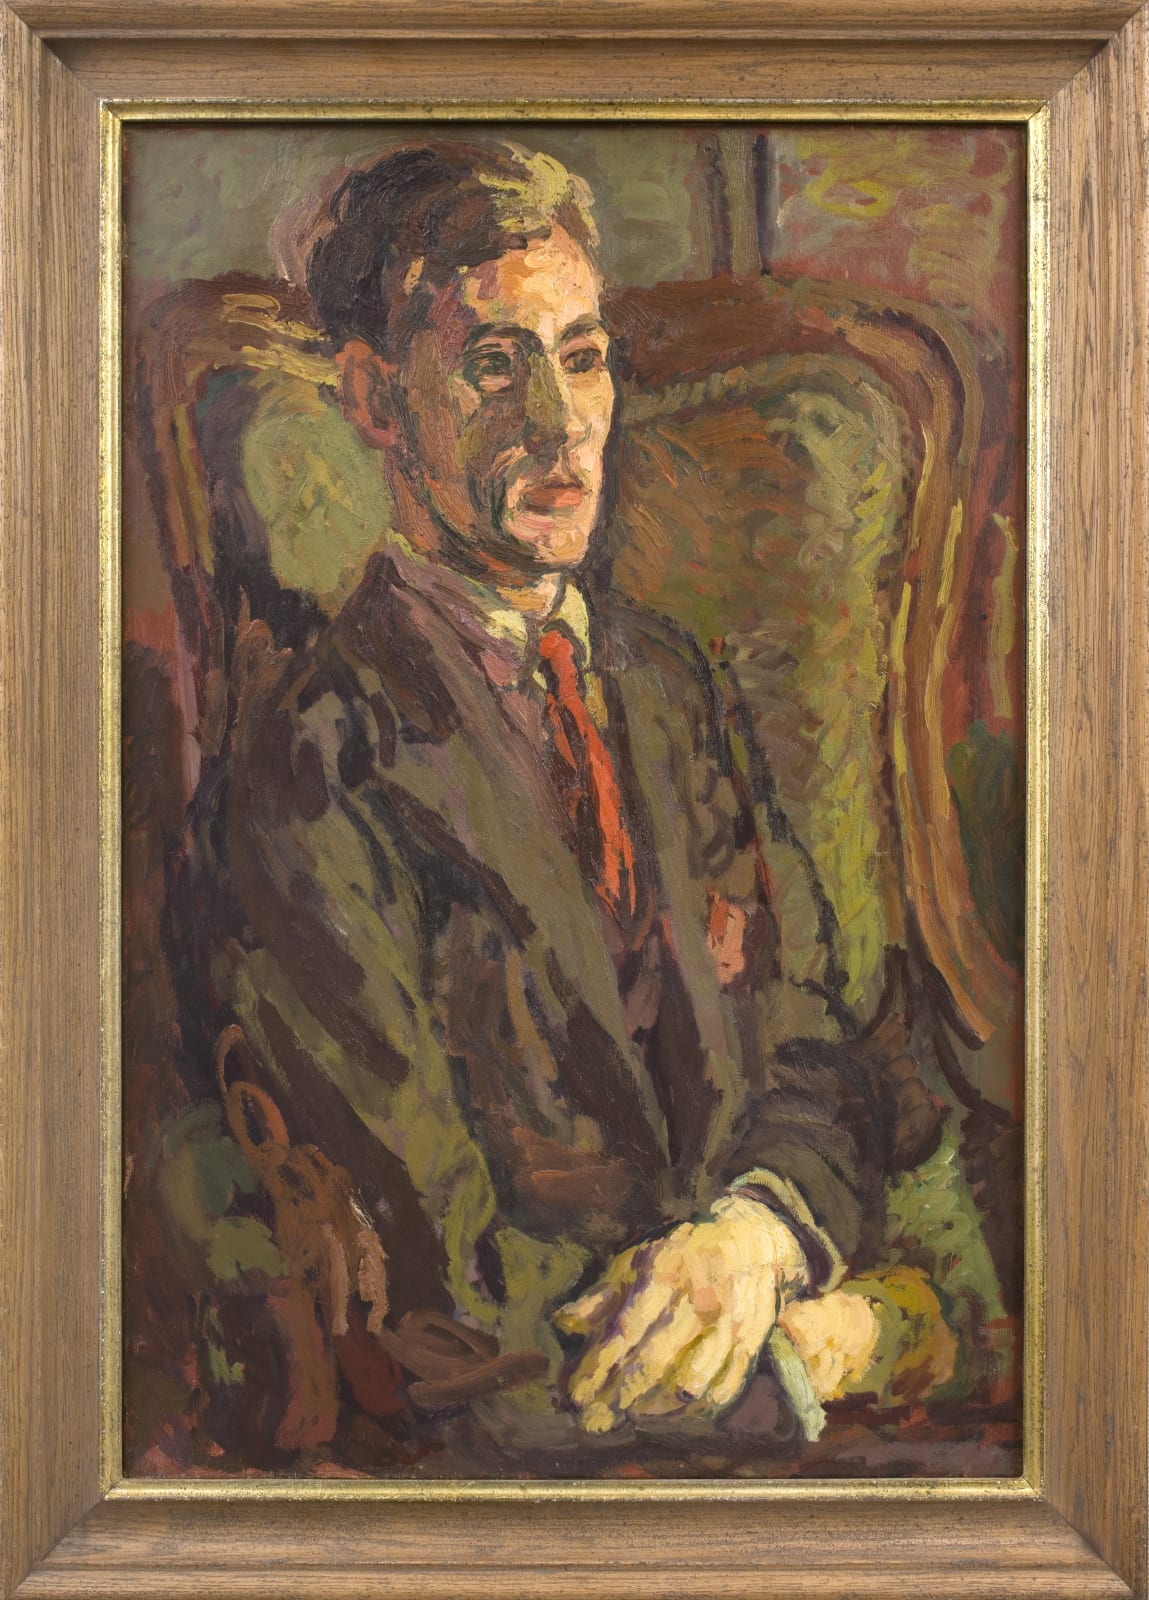 Duncan Grant, Portrait of Peter Morris Seated in a Wing Chair, 1928, c.